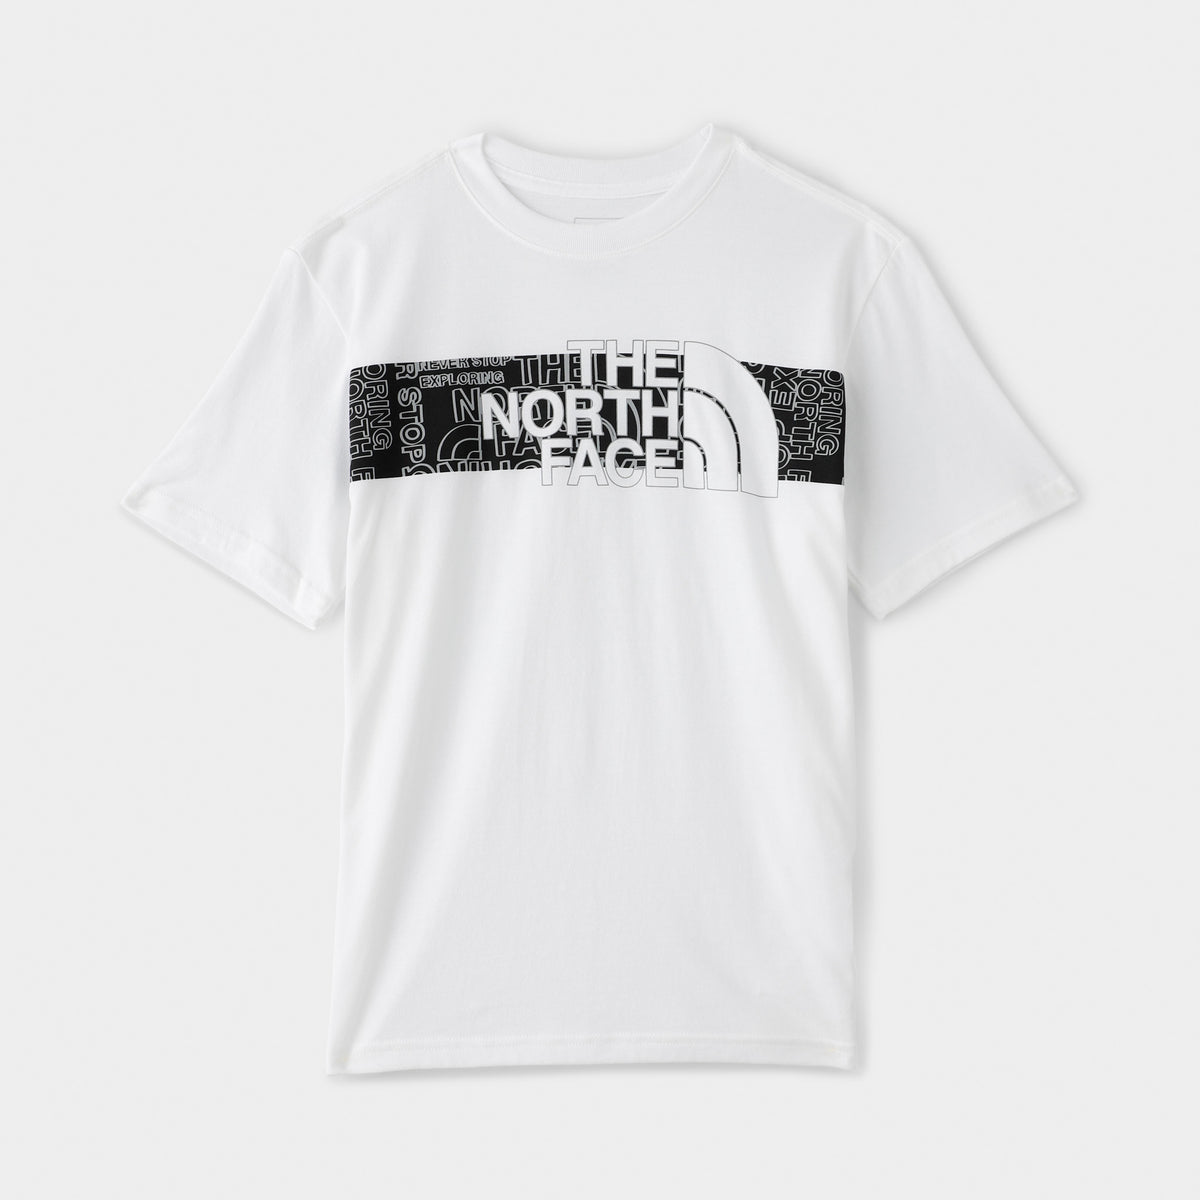 THE NORTH FACE, White Men's T-shirt